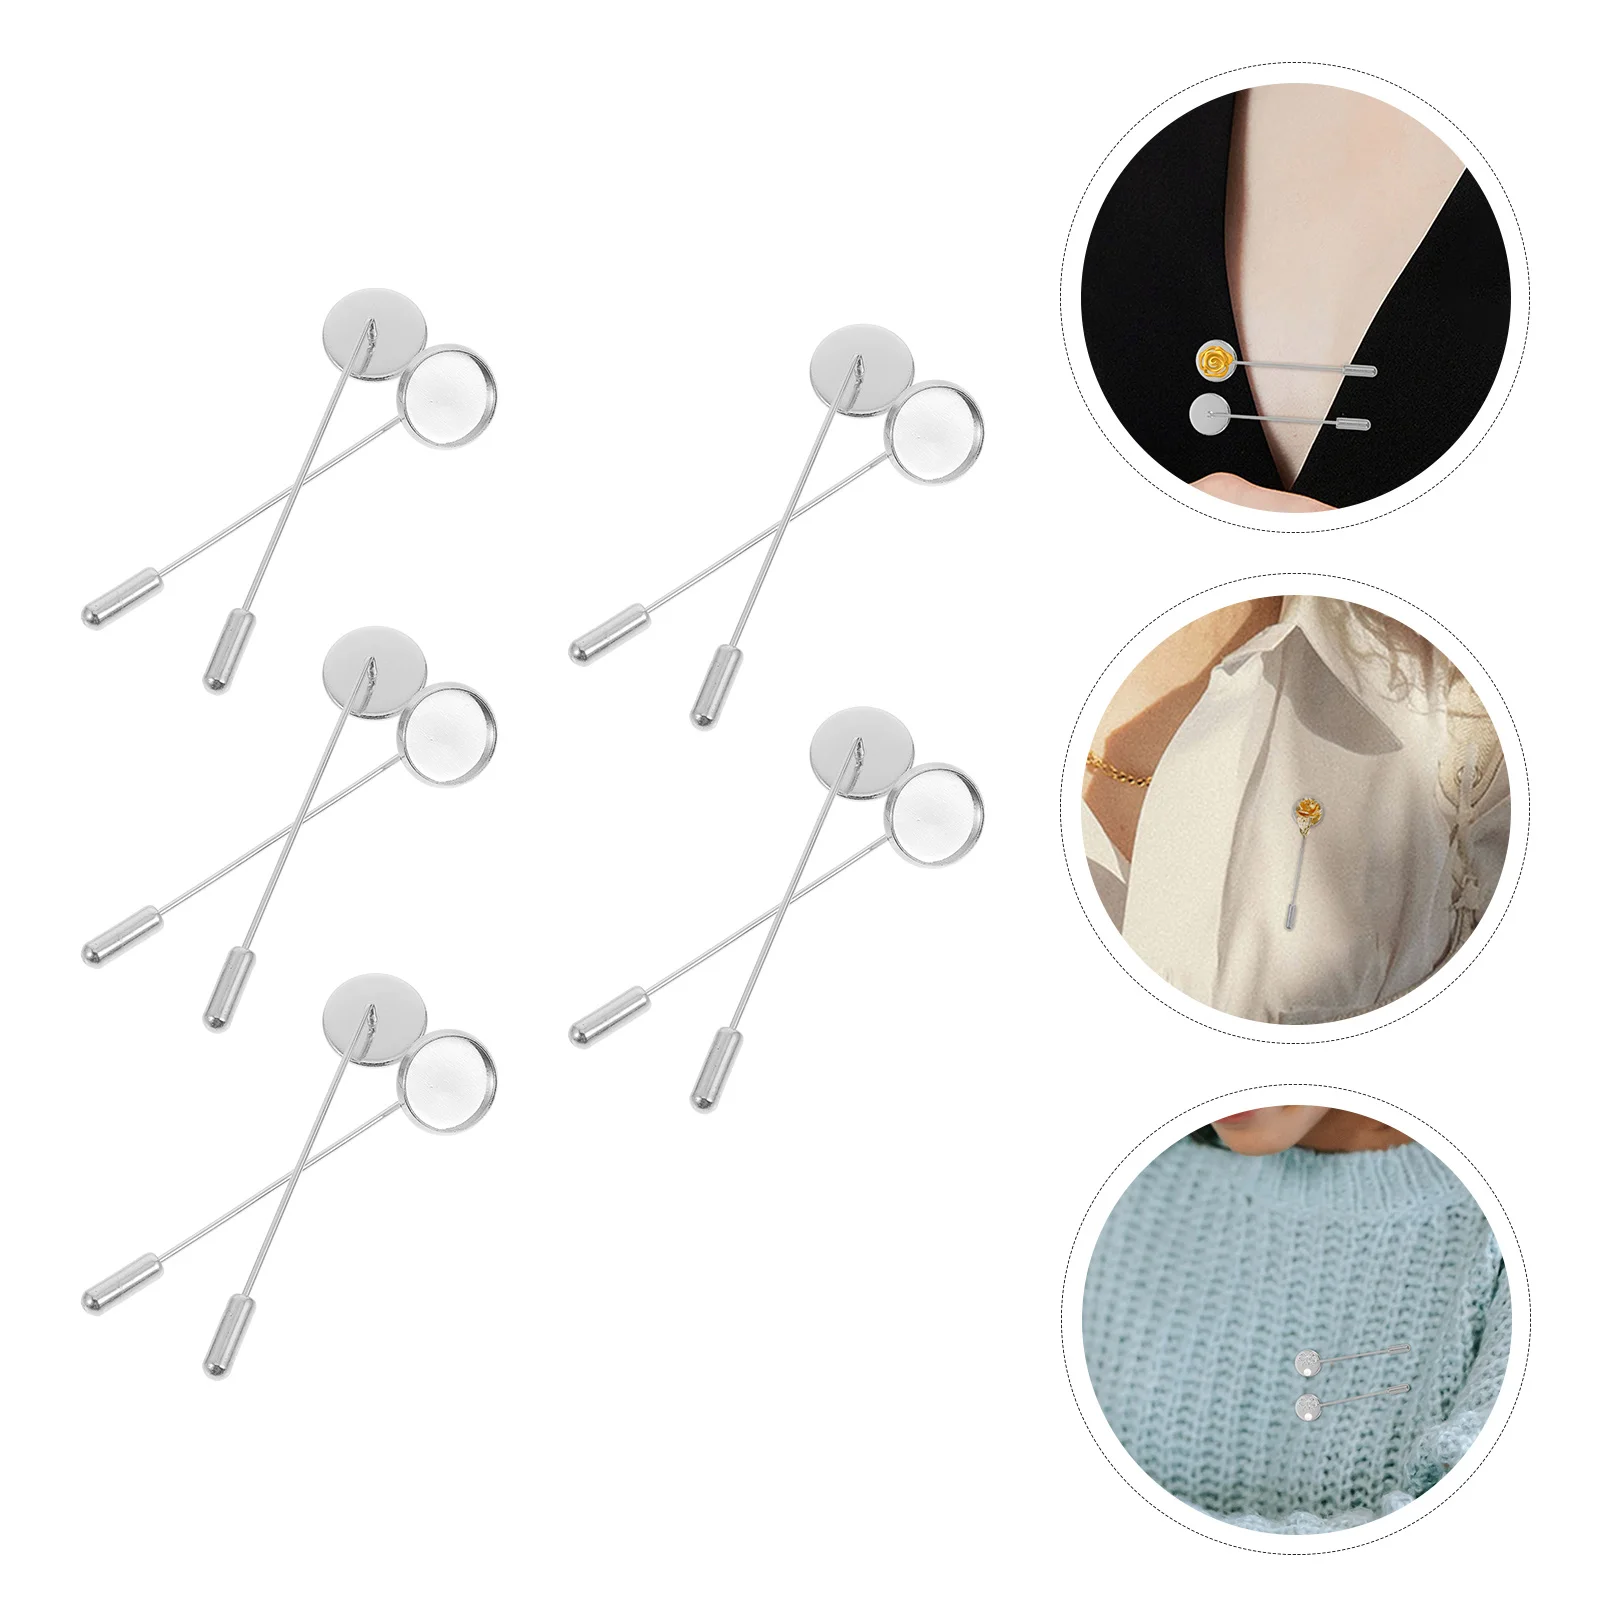 

Jewelry Trays 10Pcs Flat Round Tray Lapel Pin Stainless Steel Safety Stick Brooch Craft Lapel Safety Brooches Needle Suit